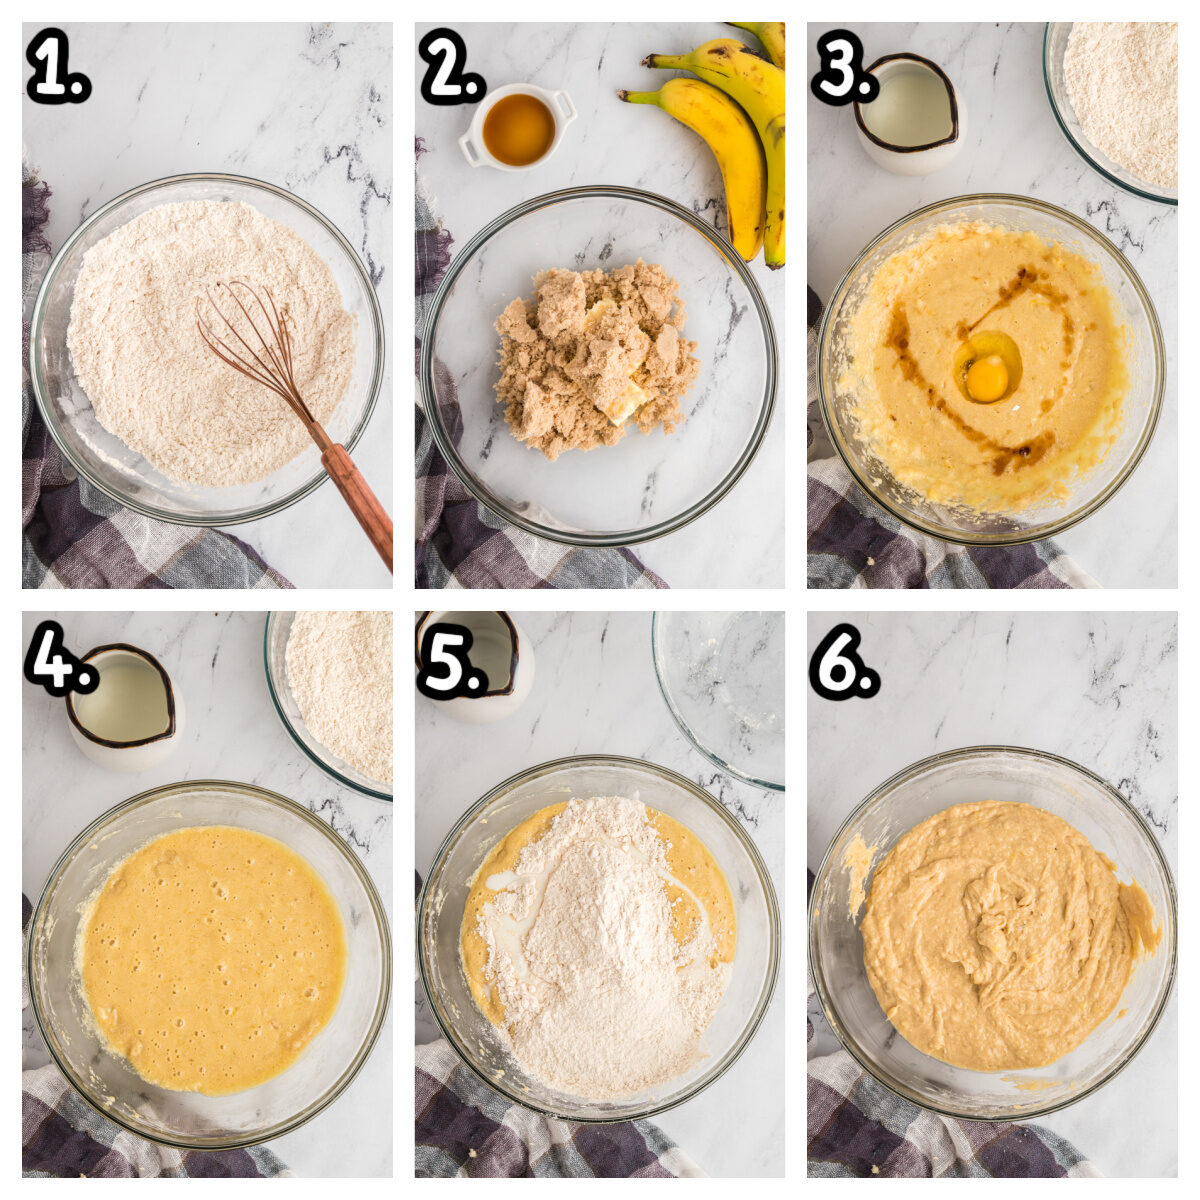 6 images showing how to make the batter for banana bread.